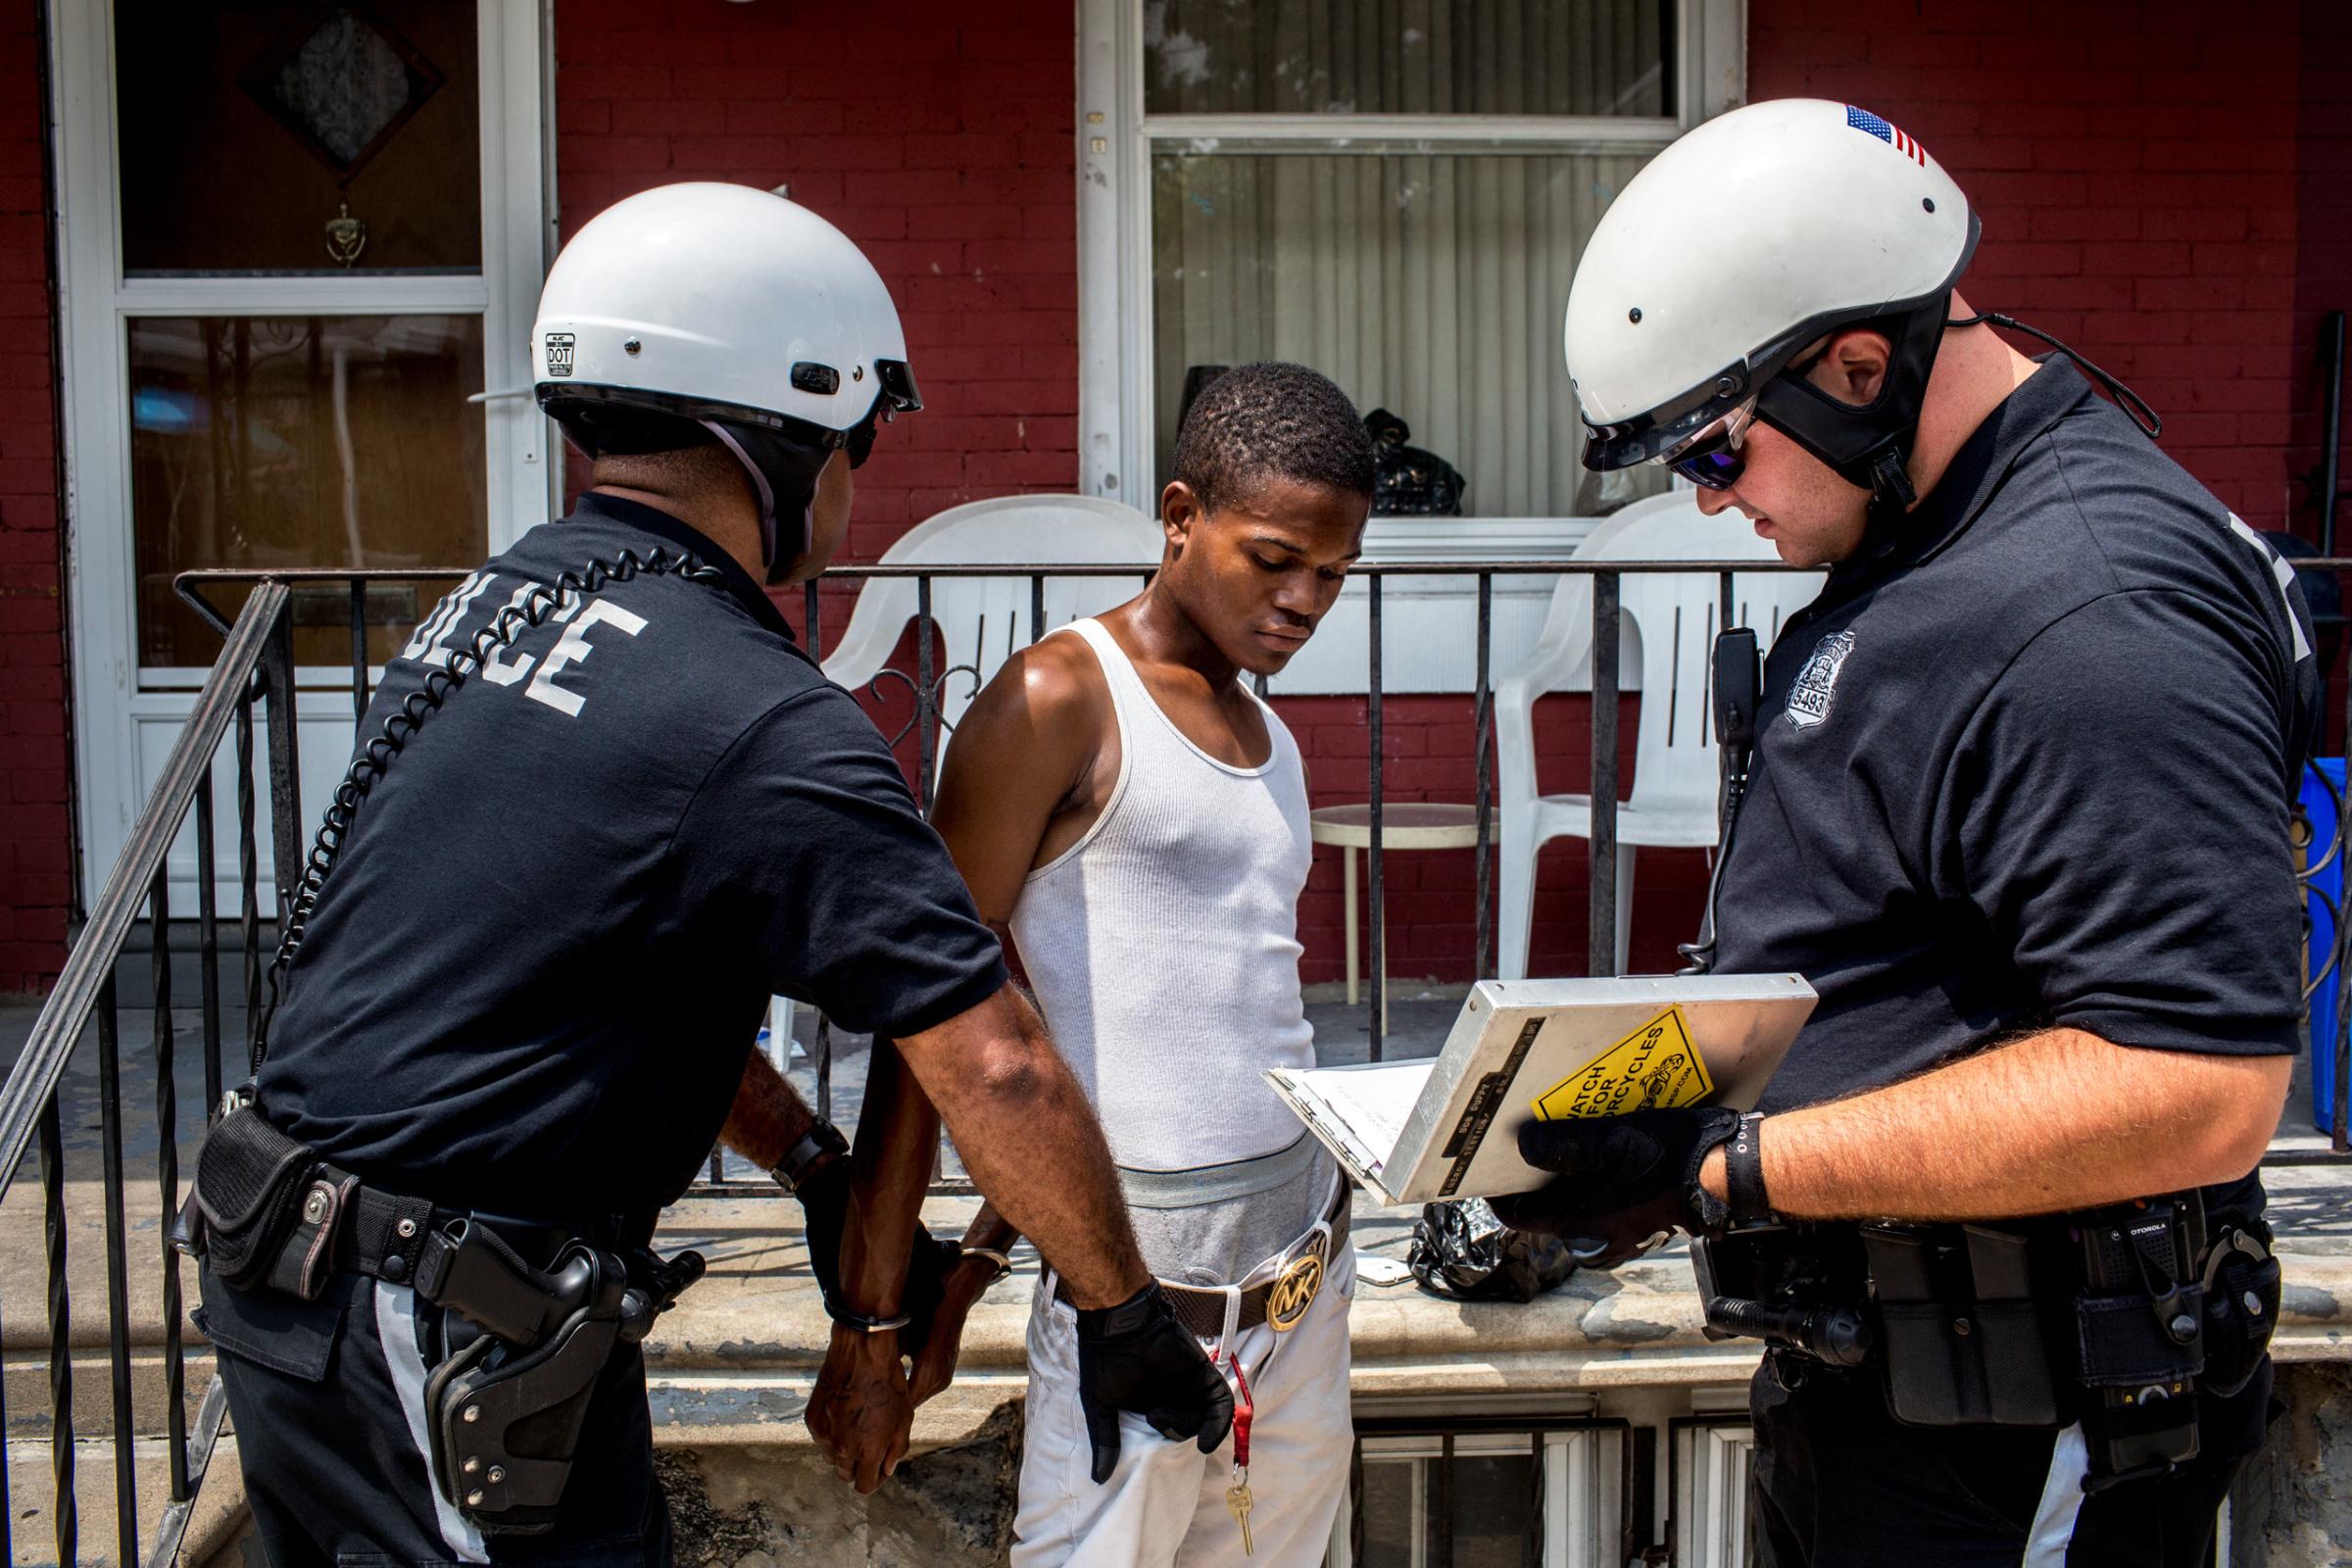 July 29, 2015. Philadelphia, PA. Officers Brian Dillard (left) and Robert Saccone (Right) detain a young man who fit the description of a criminal suspect in West Philadelphia. After being searched and questioned he was released. (Natalie Keyssar)